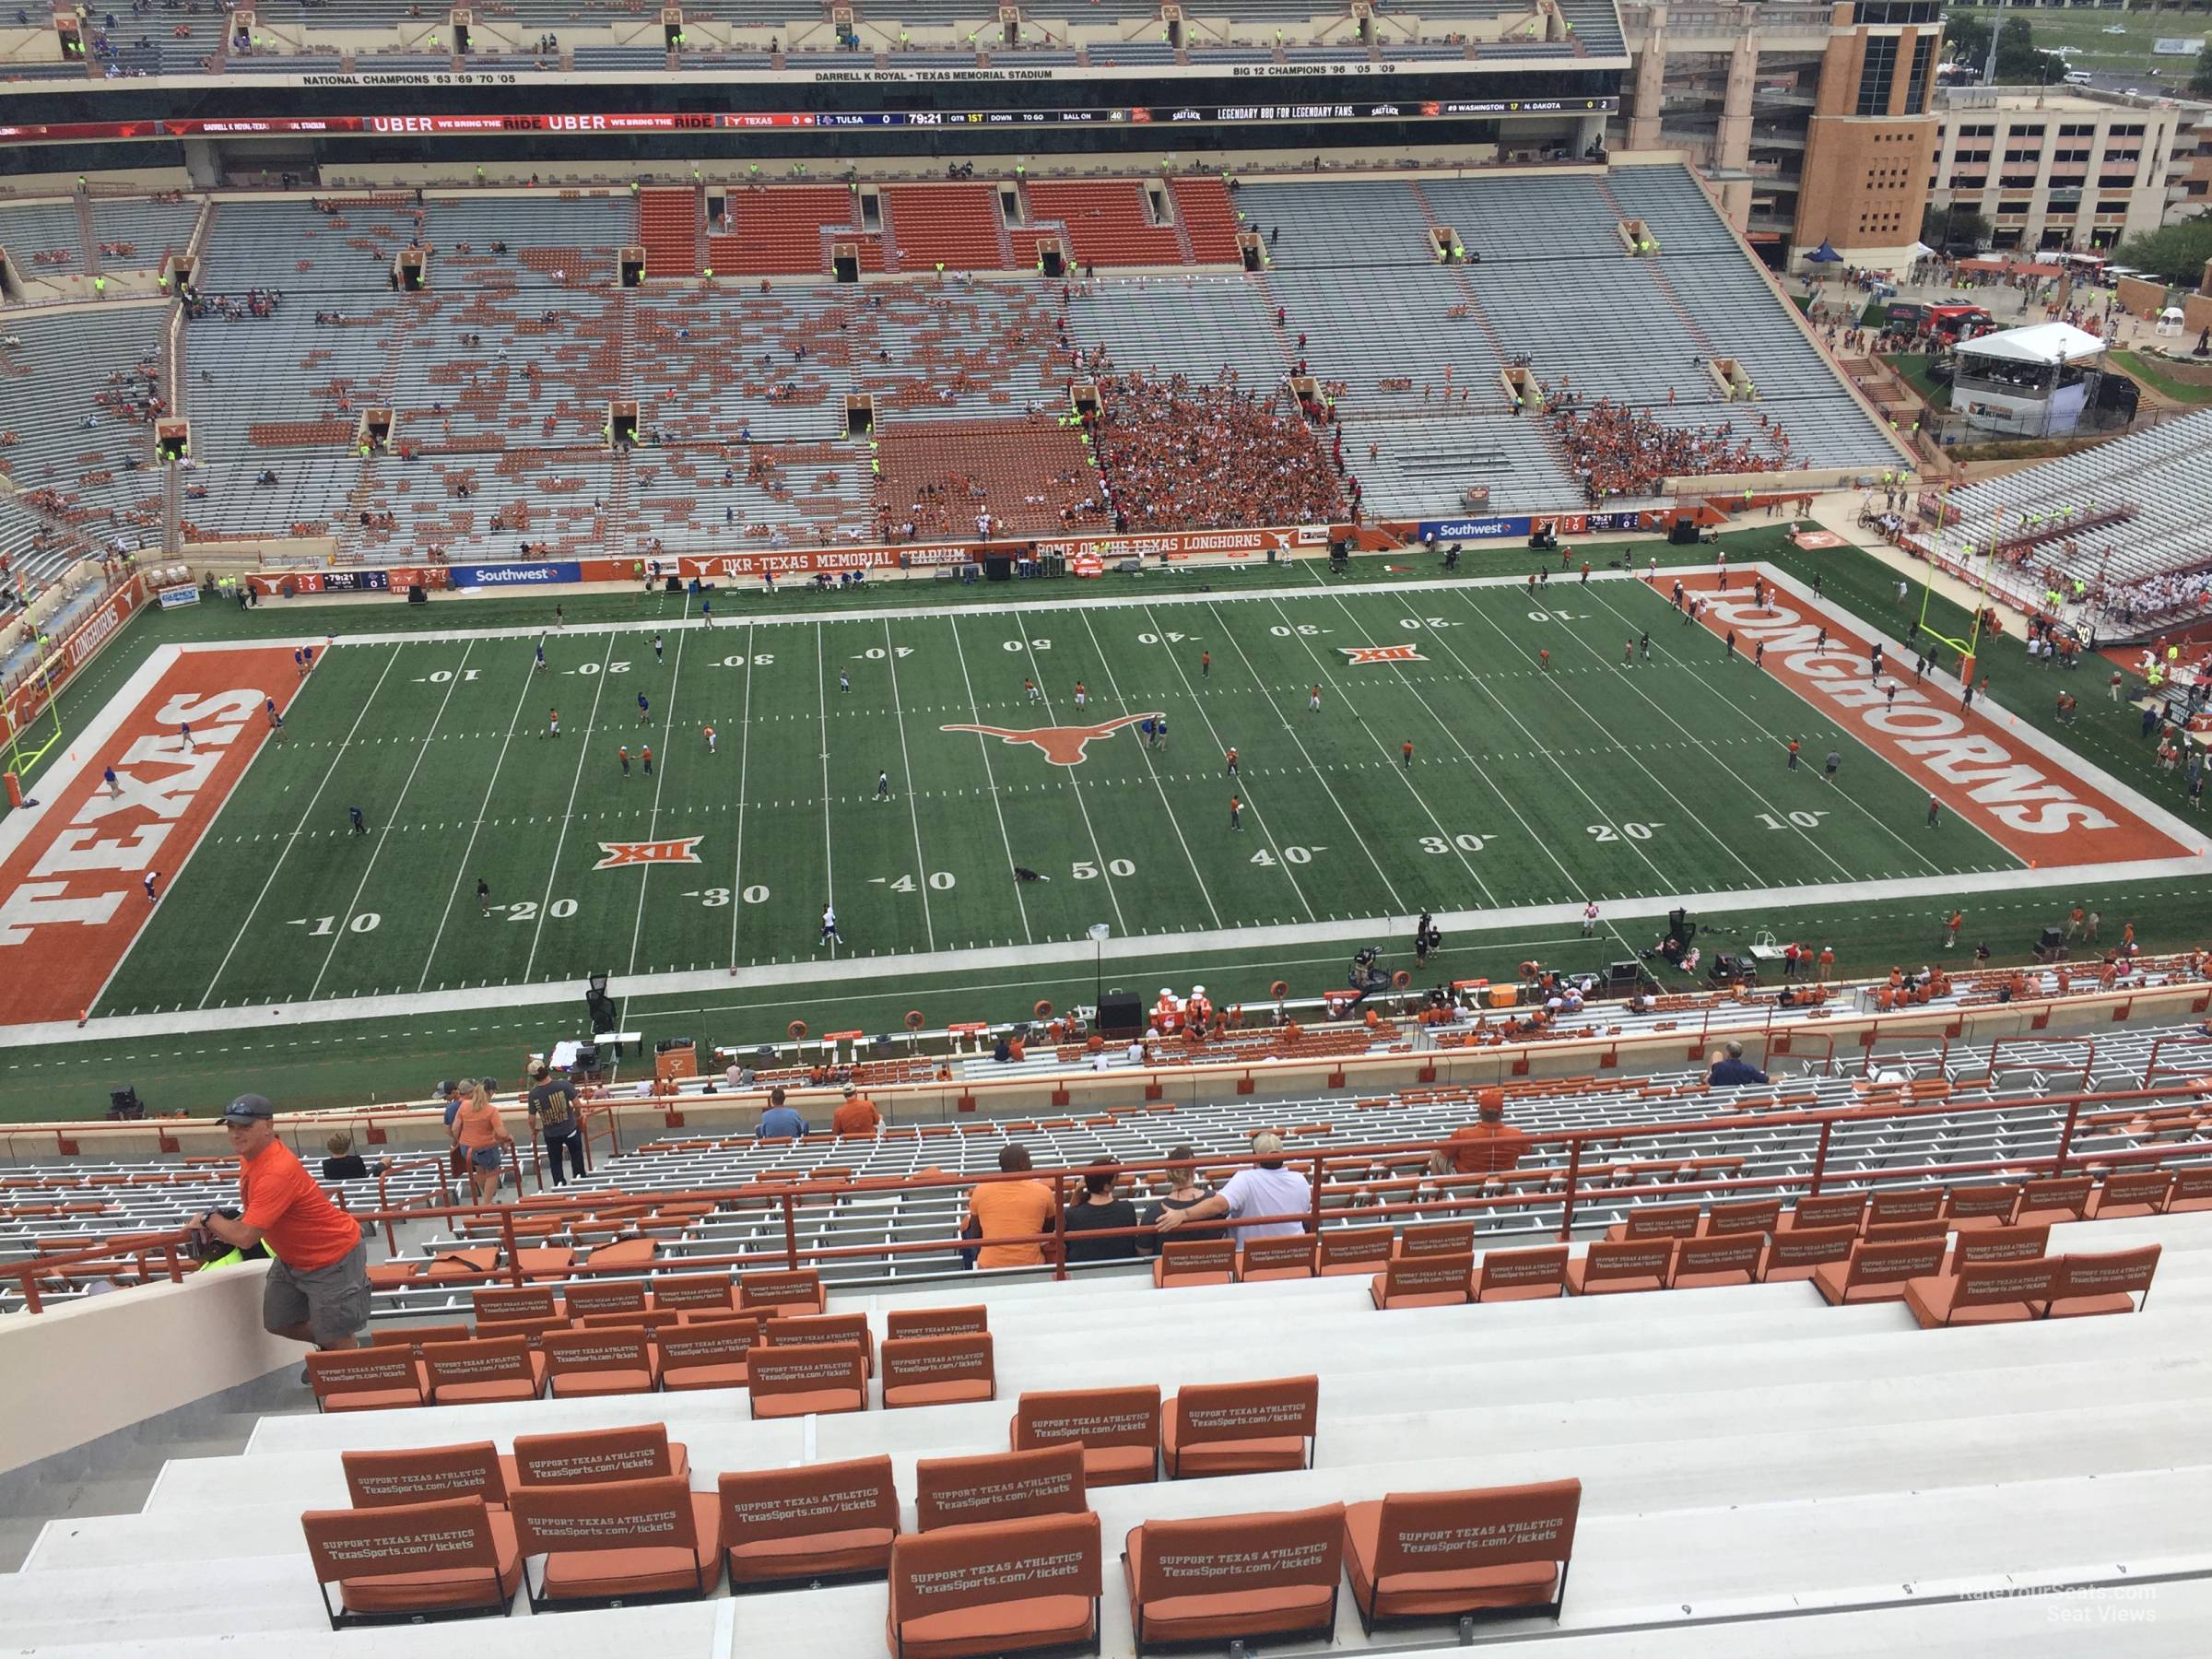 section 105, row 30 seat view  - dkr-texas memorial stadium